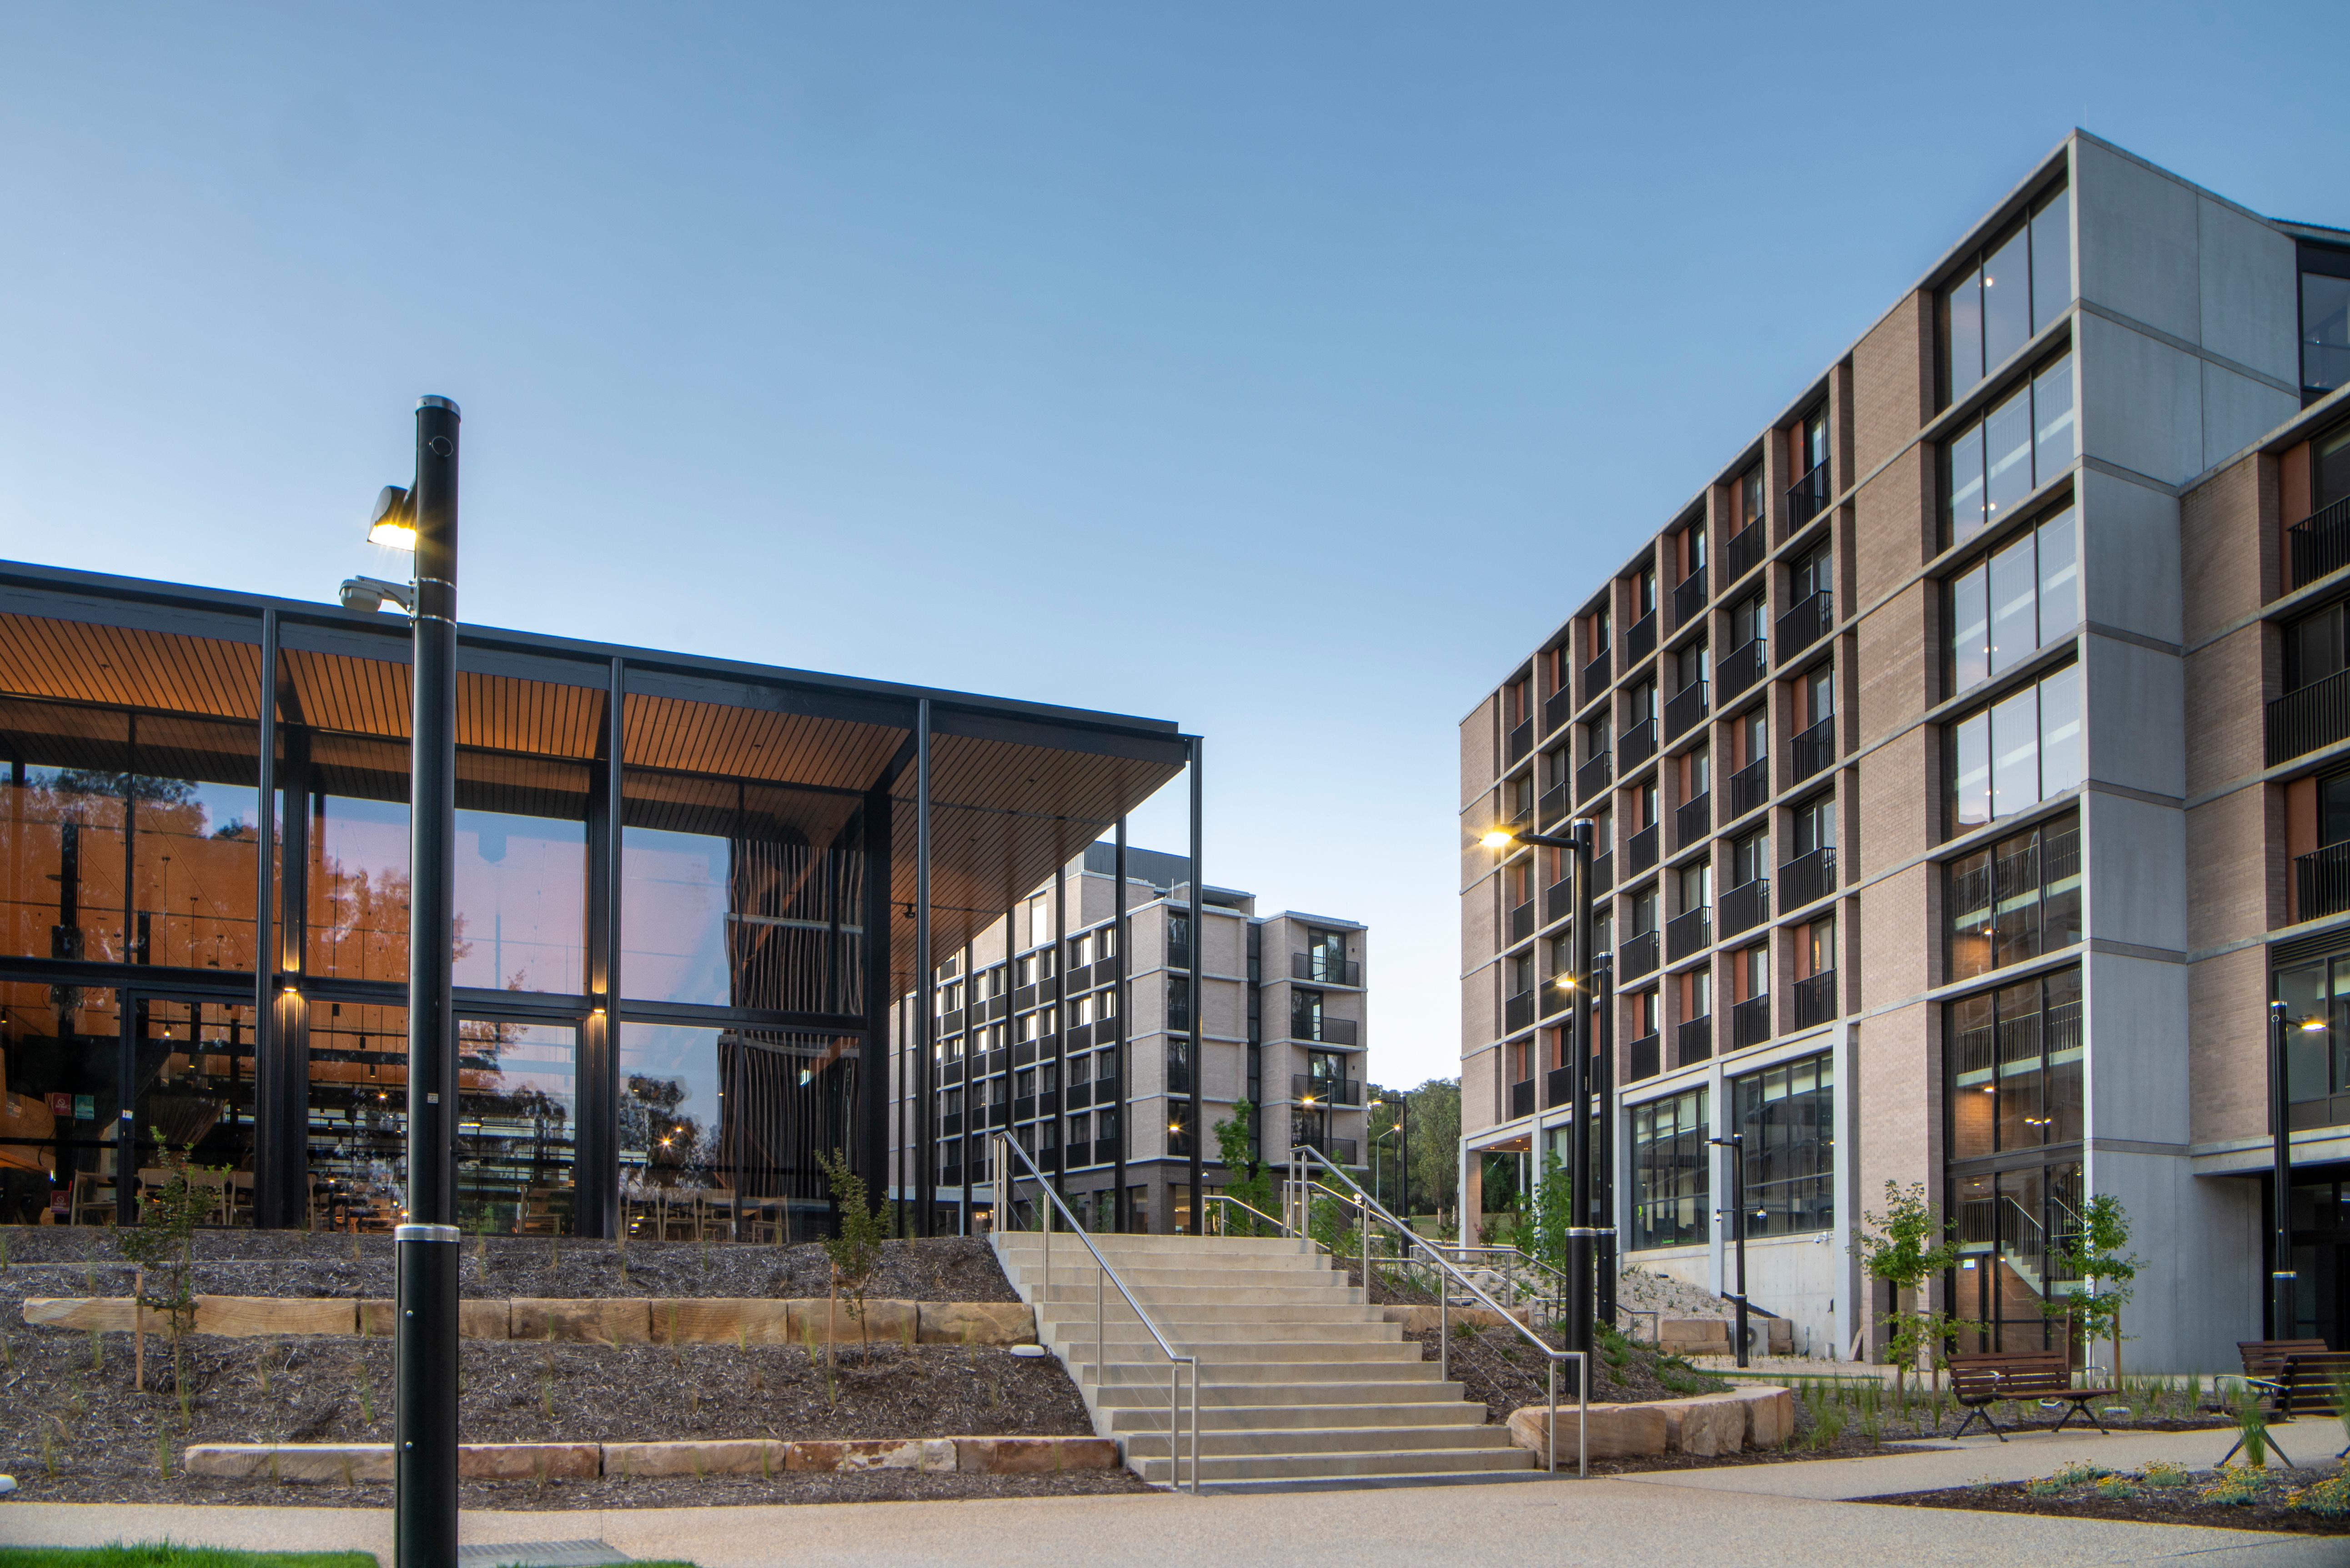 A vibrant photograph featuring Yukeembruk, one of the ANU on campus accommodation